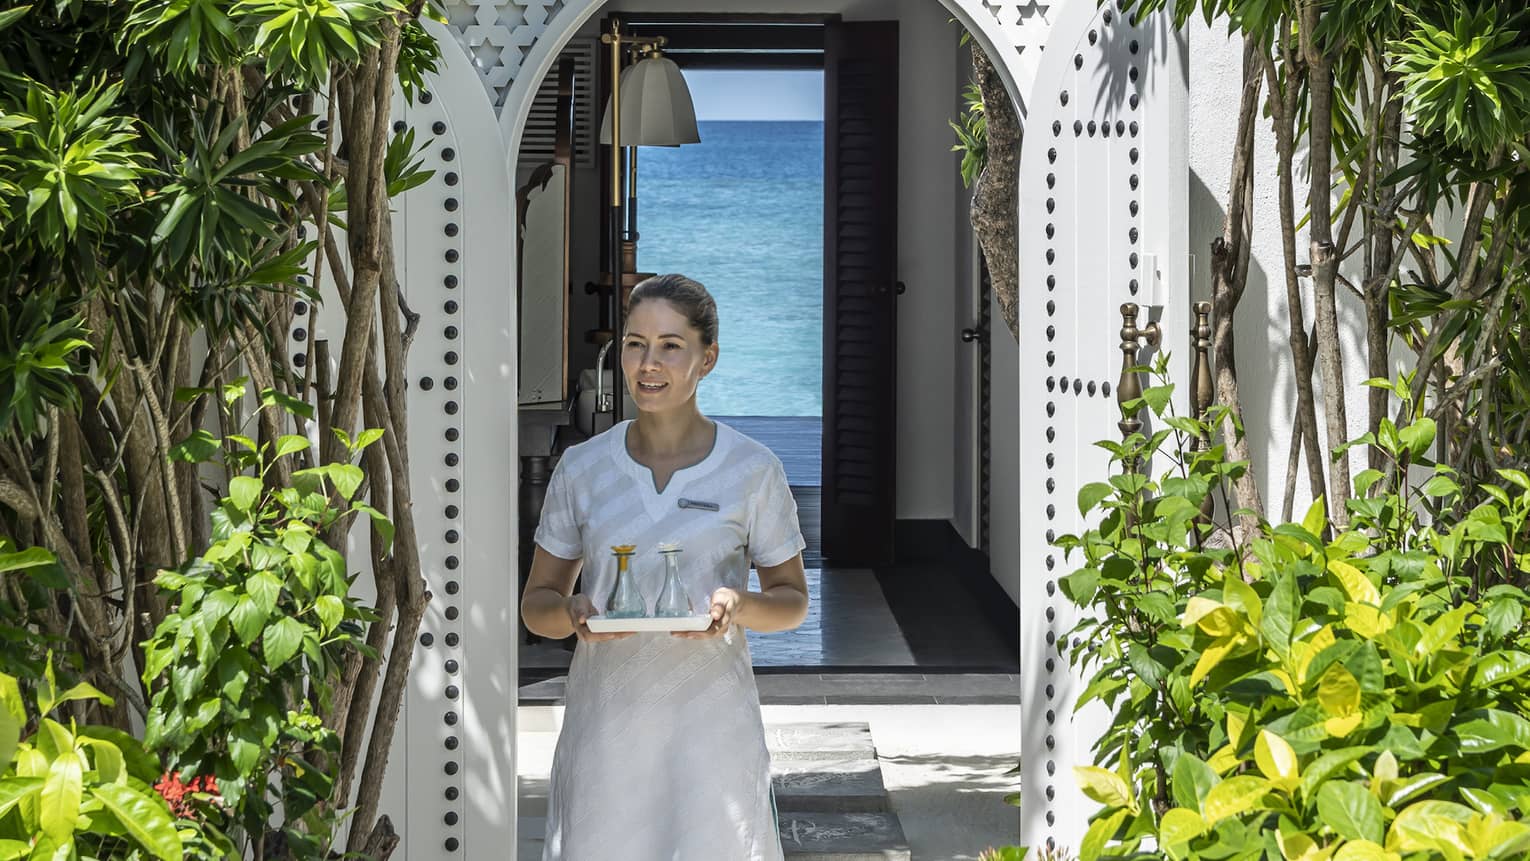 A four seasons spa member carries a tray of food through a shrubbery lined archway 